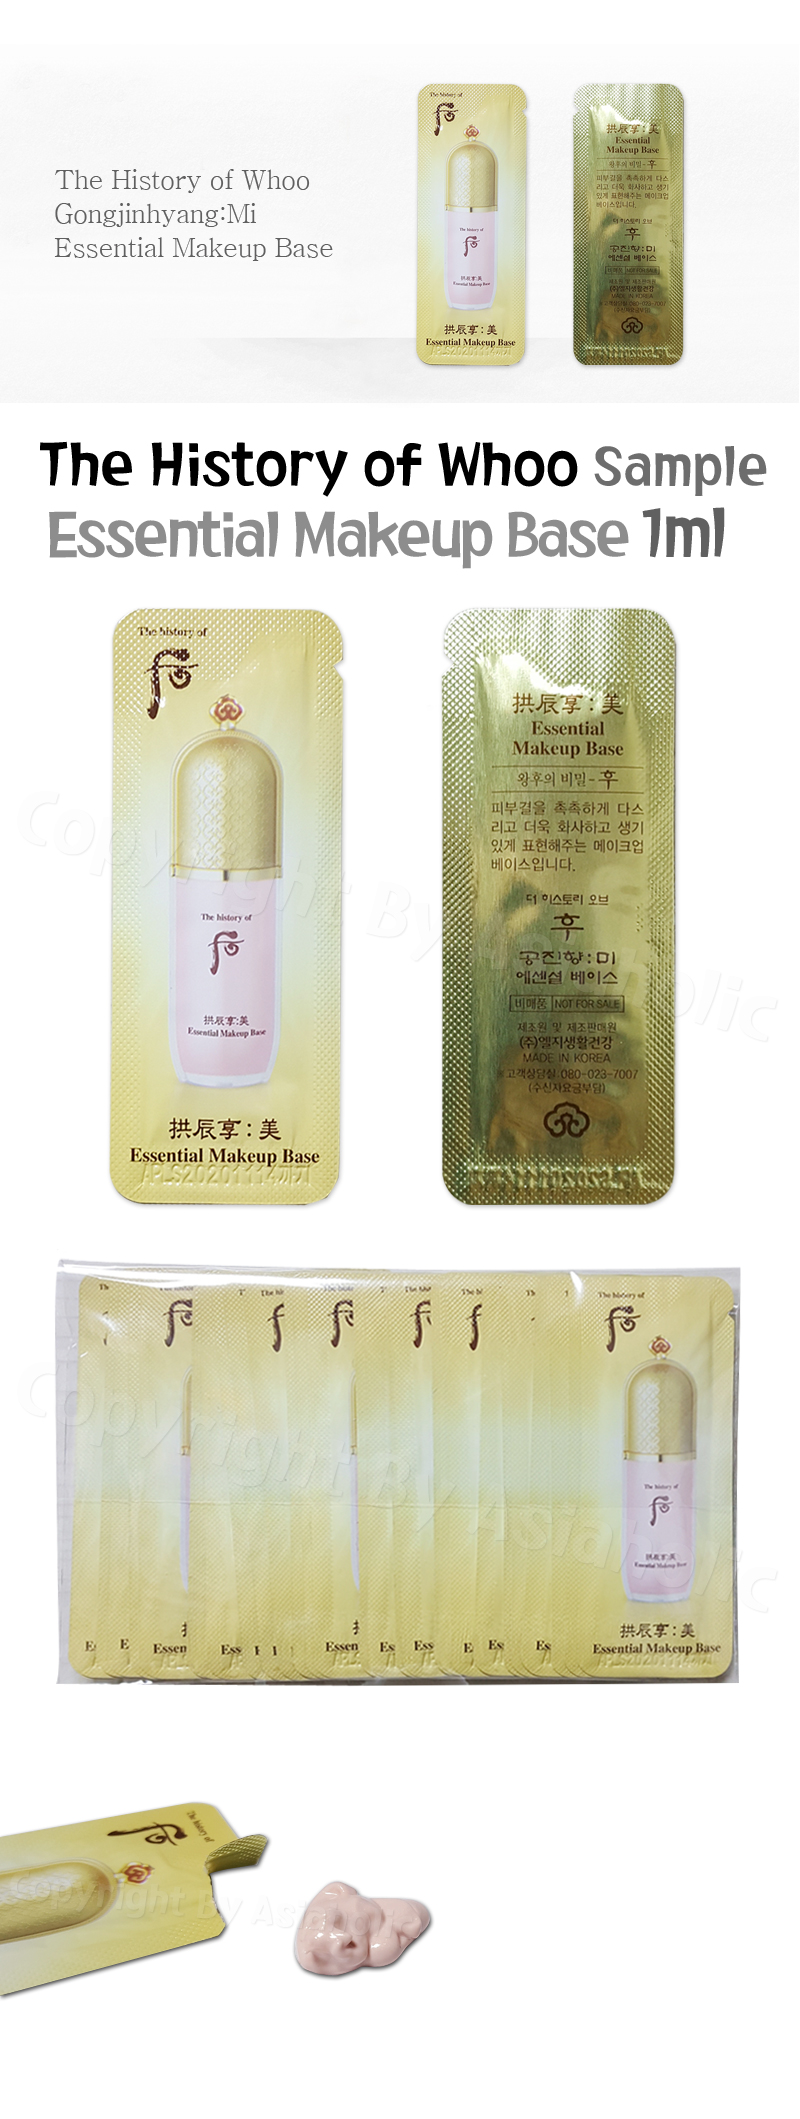 The history of Whoo Gongjinhyang Mi Essential Makeup Base 1ml x 20pcs (20ml) Newest Version